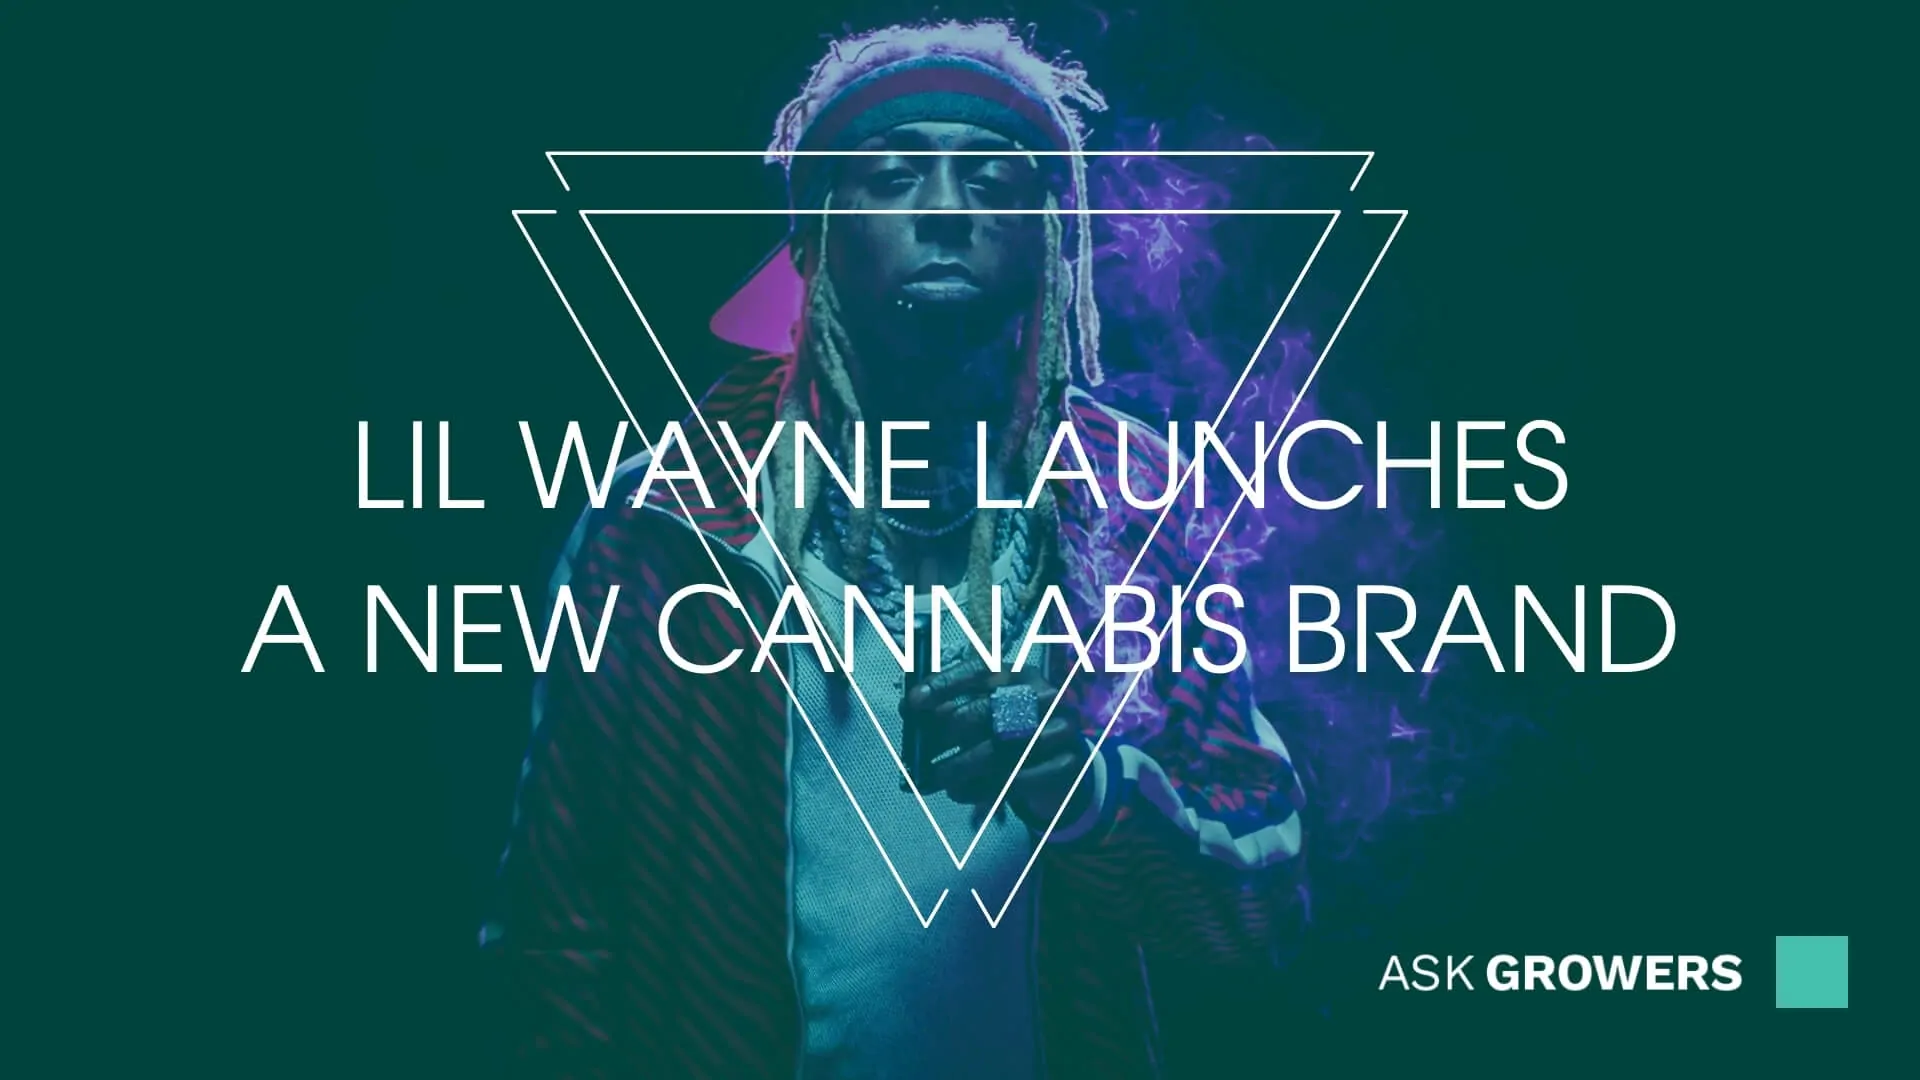 Lil Wayne Launches a New Cannabis Brand